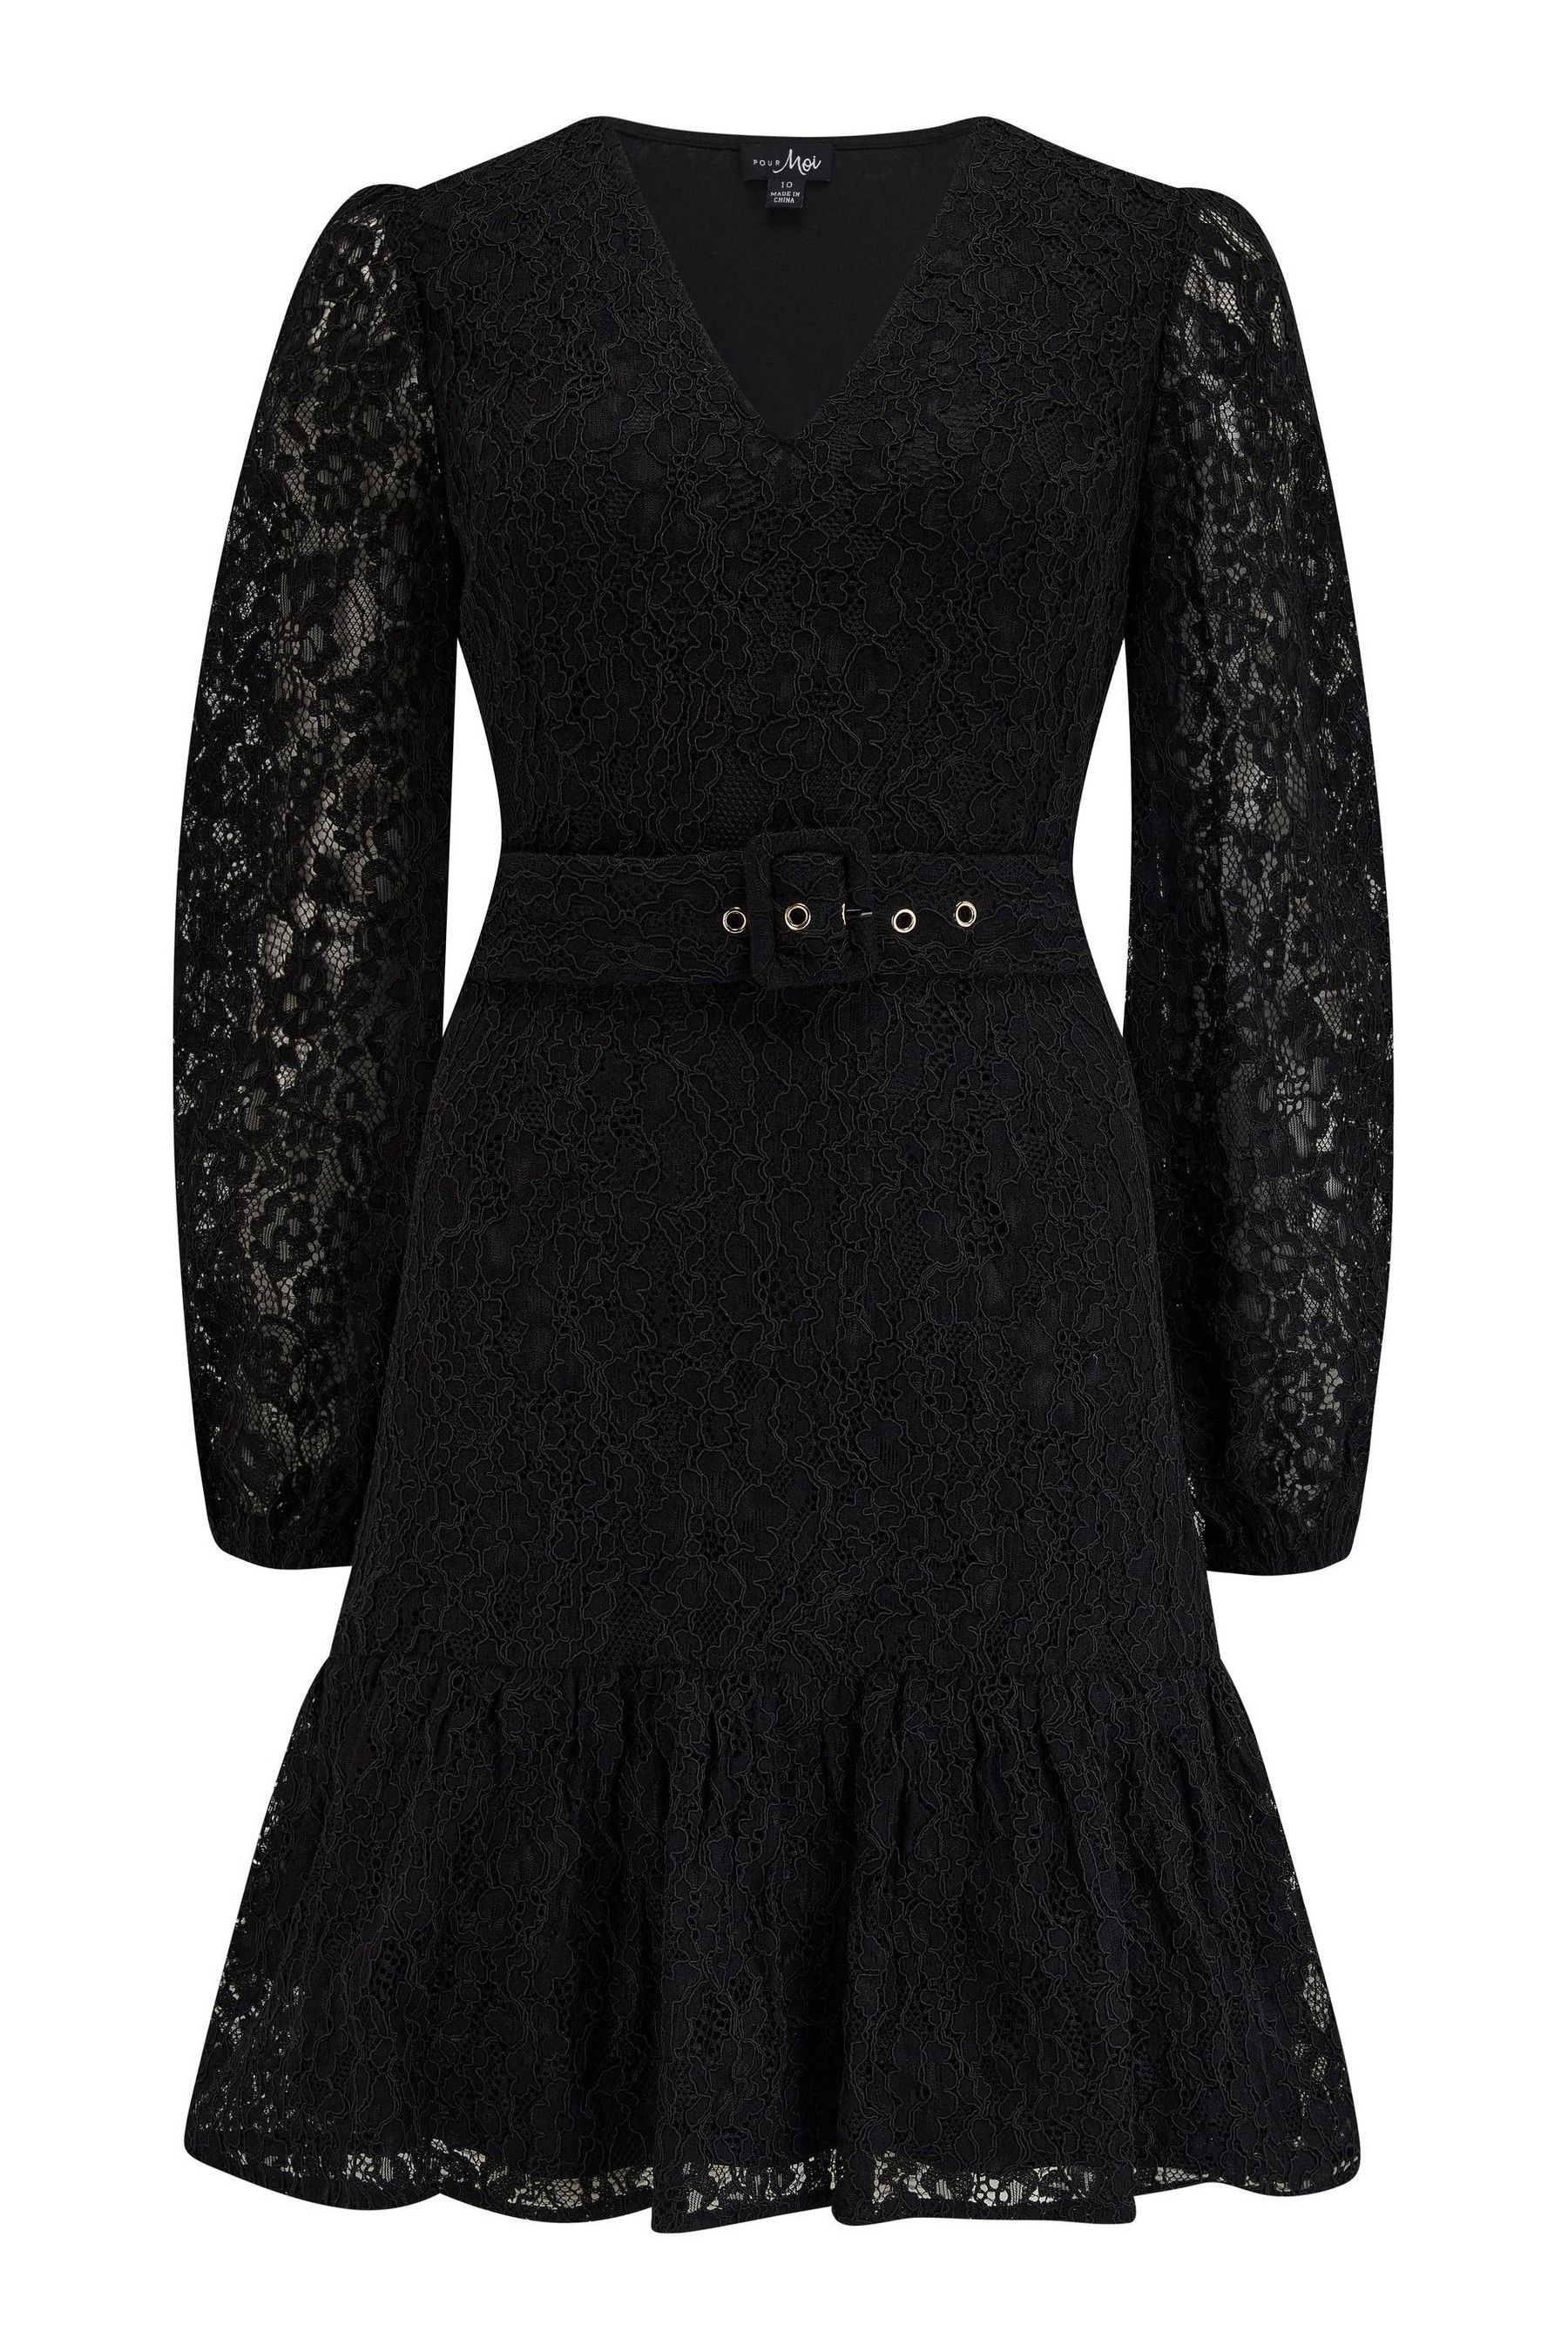 Buy Pour Moi Black Corded Lace Fitted Lorena Dress with Belt from the ...